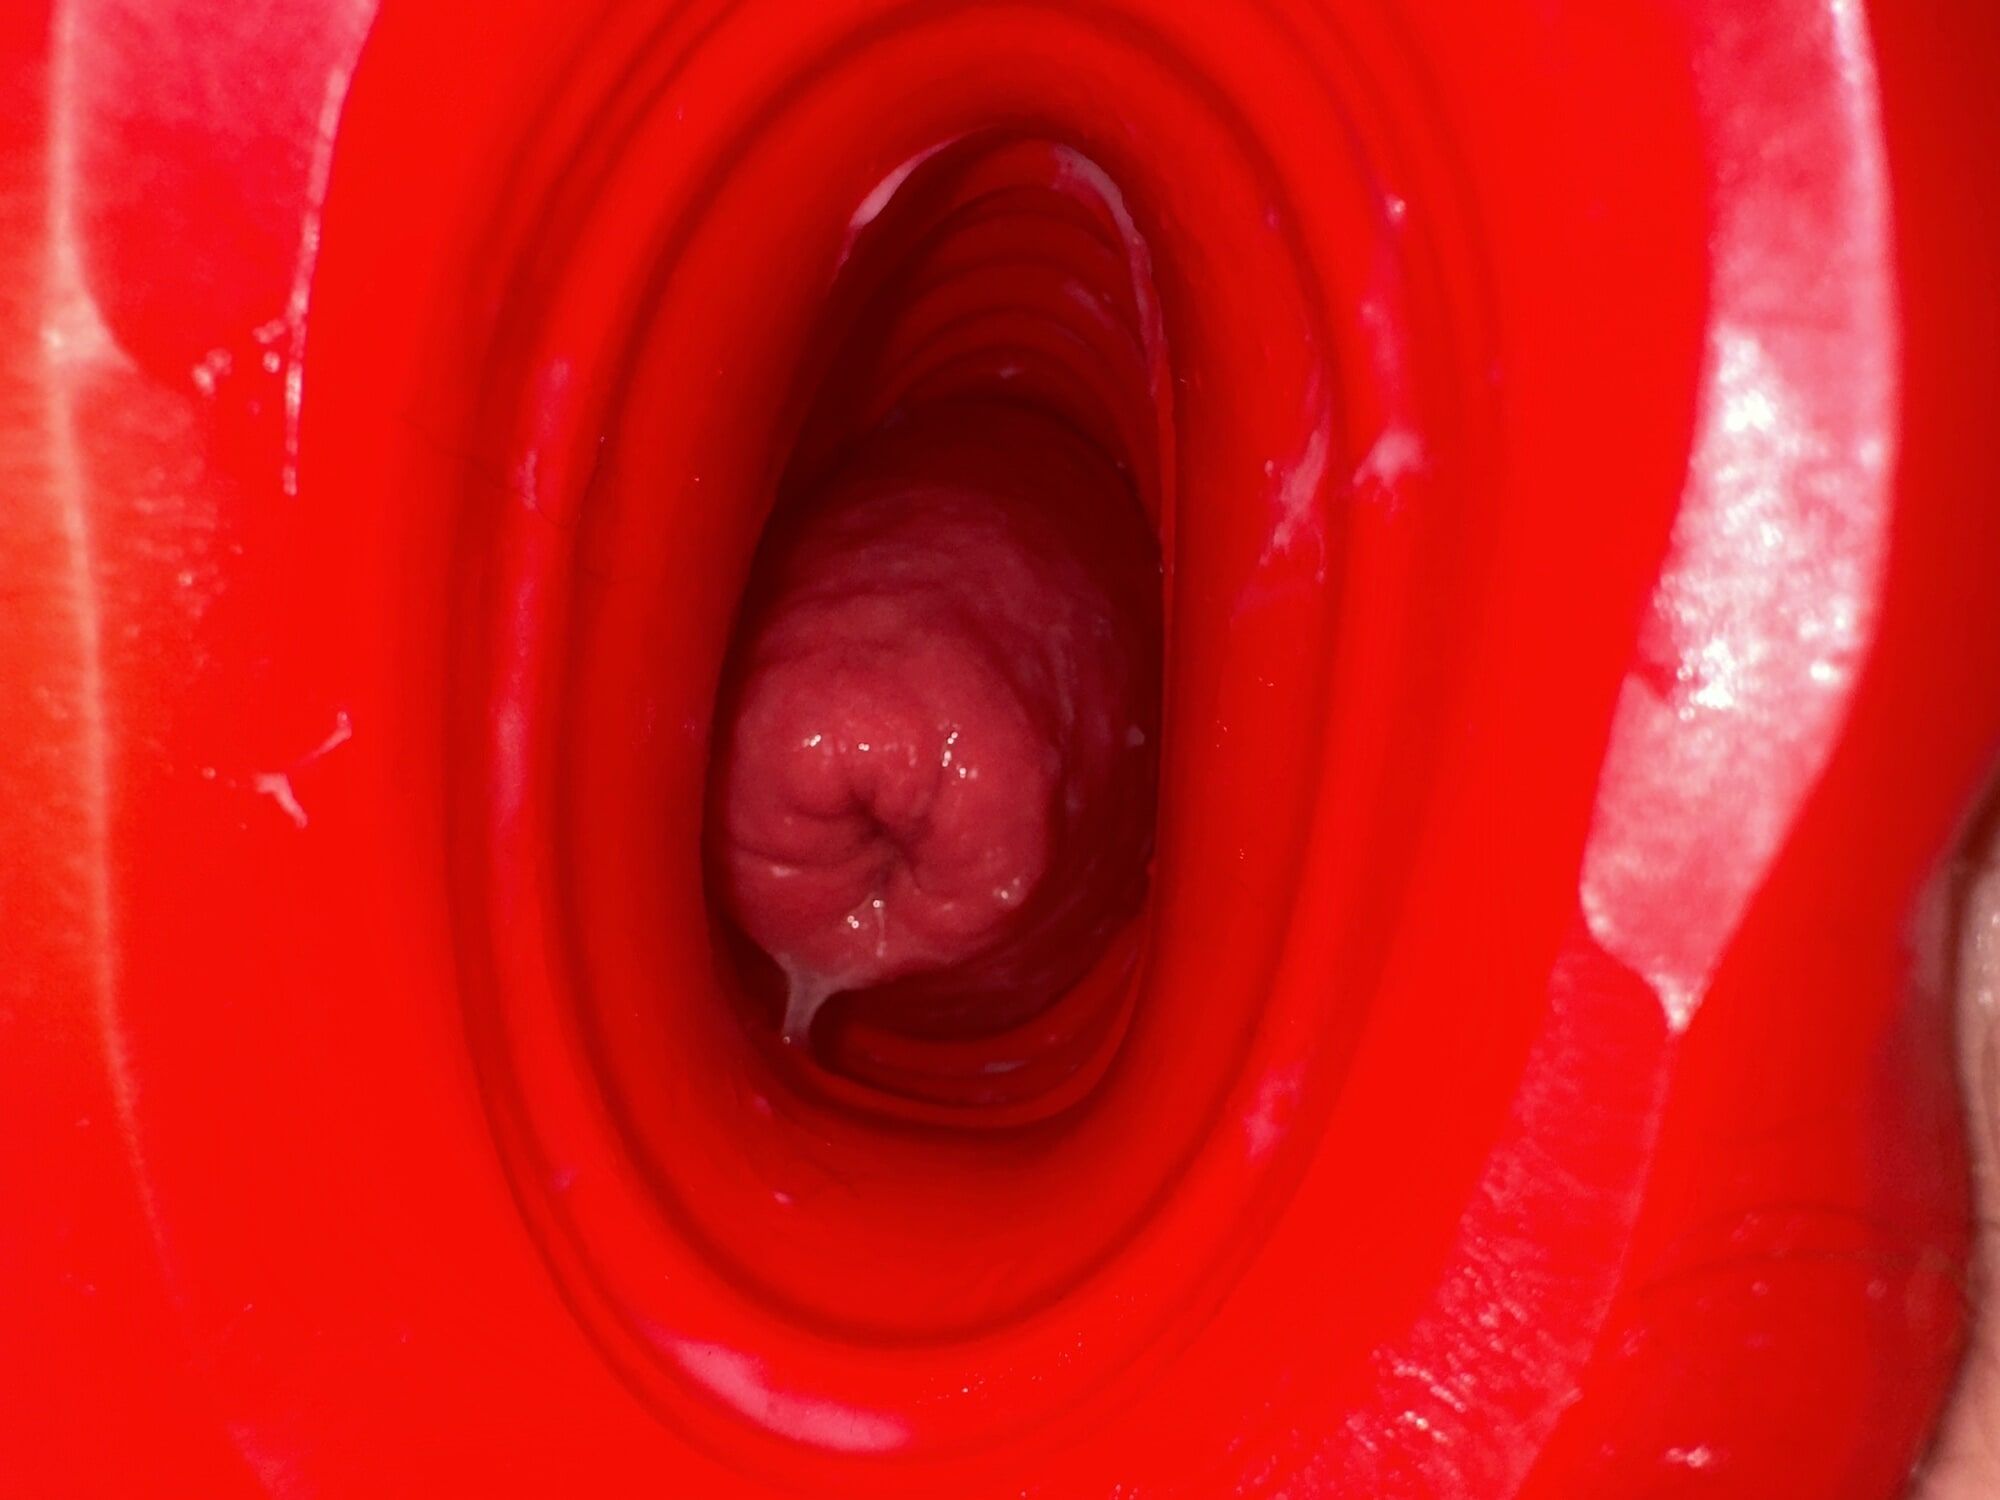 Anal prolapse in oxball ff pighole #10